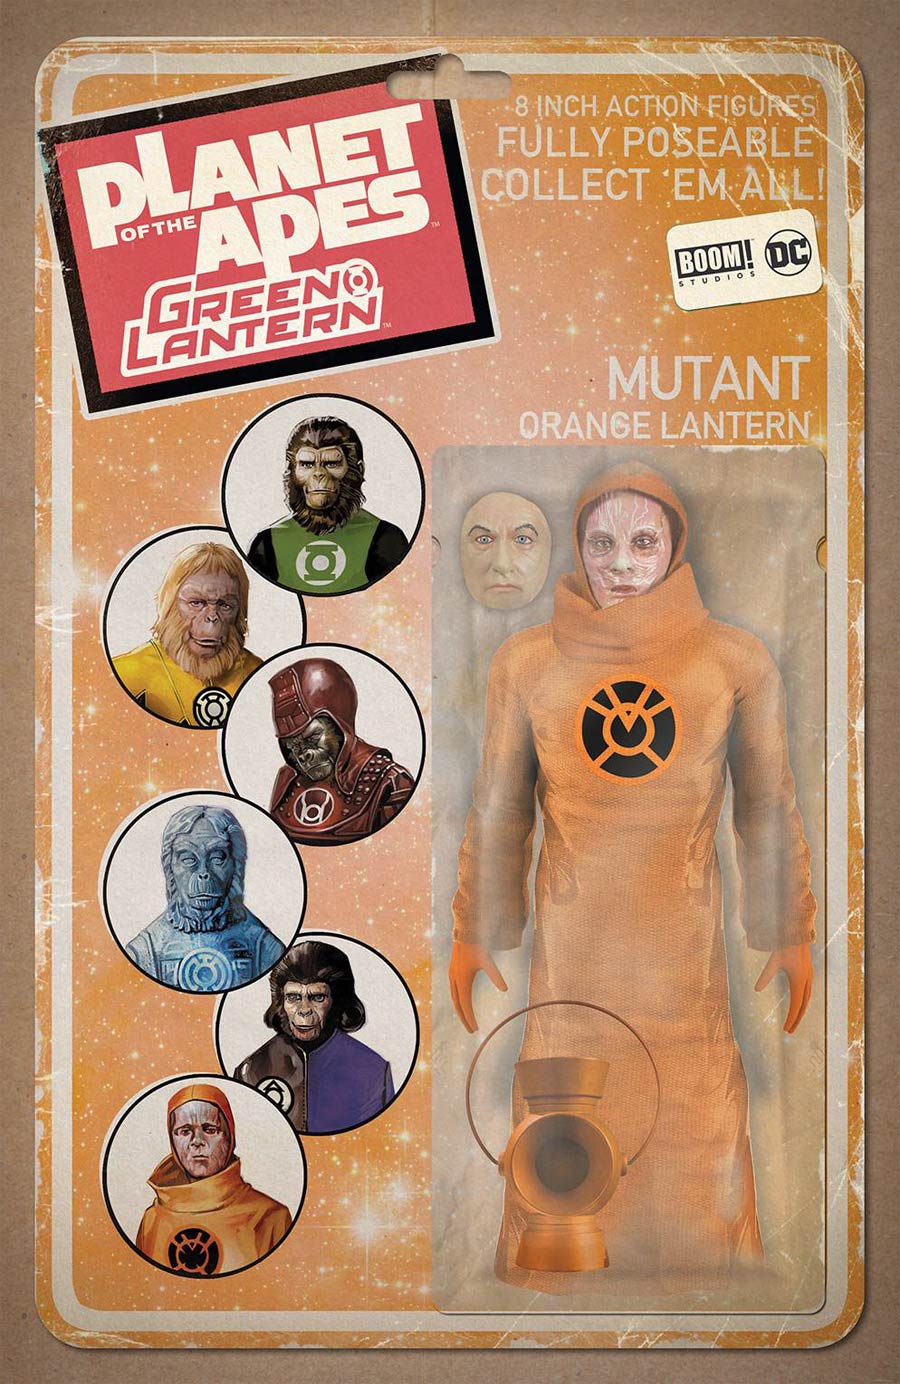 Planet Of The Apes Green Lantern #6 Cover B Variant David Ryan Robinson Vintage Action Figure Cover